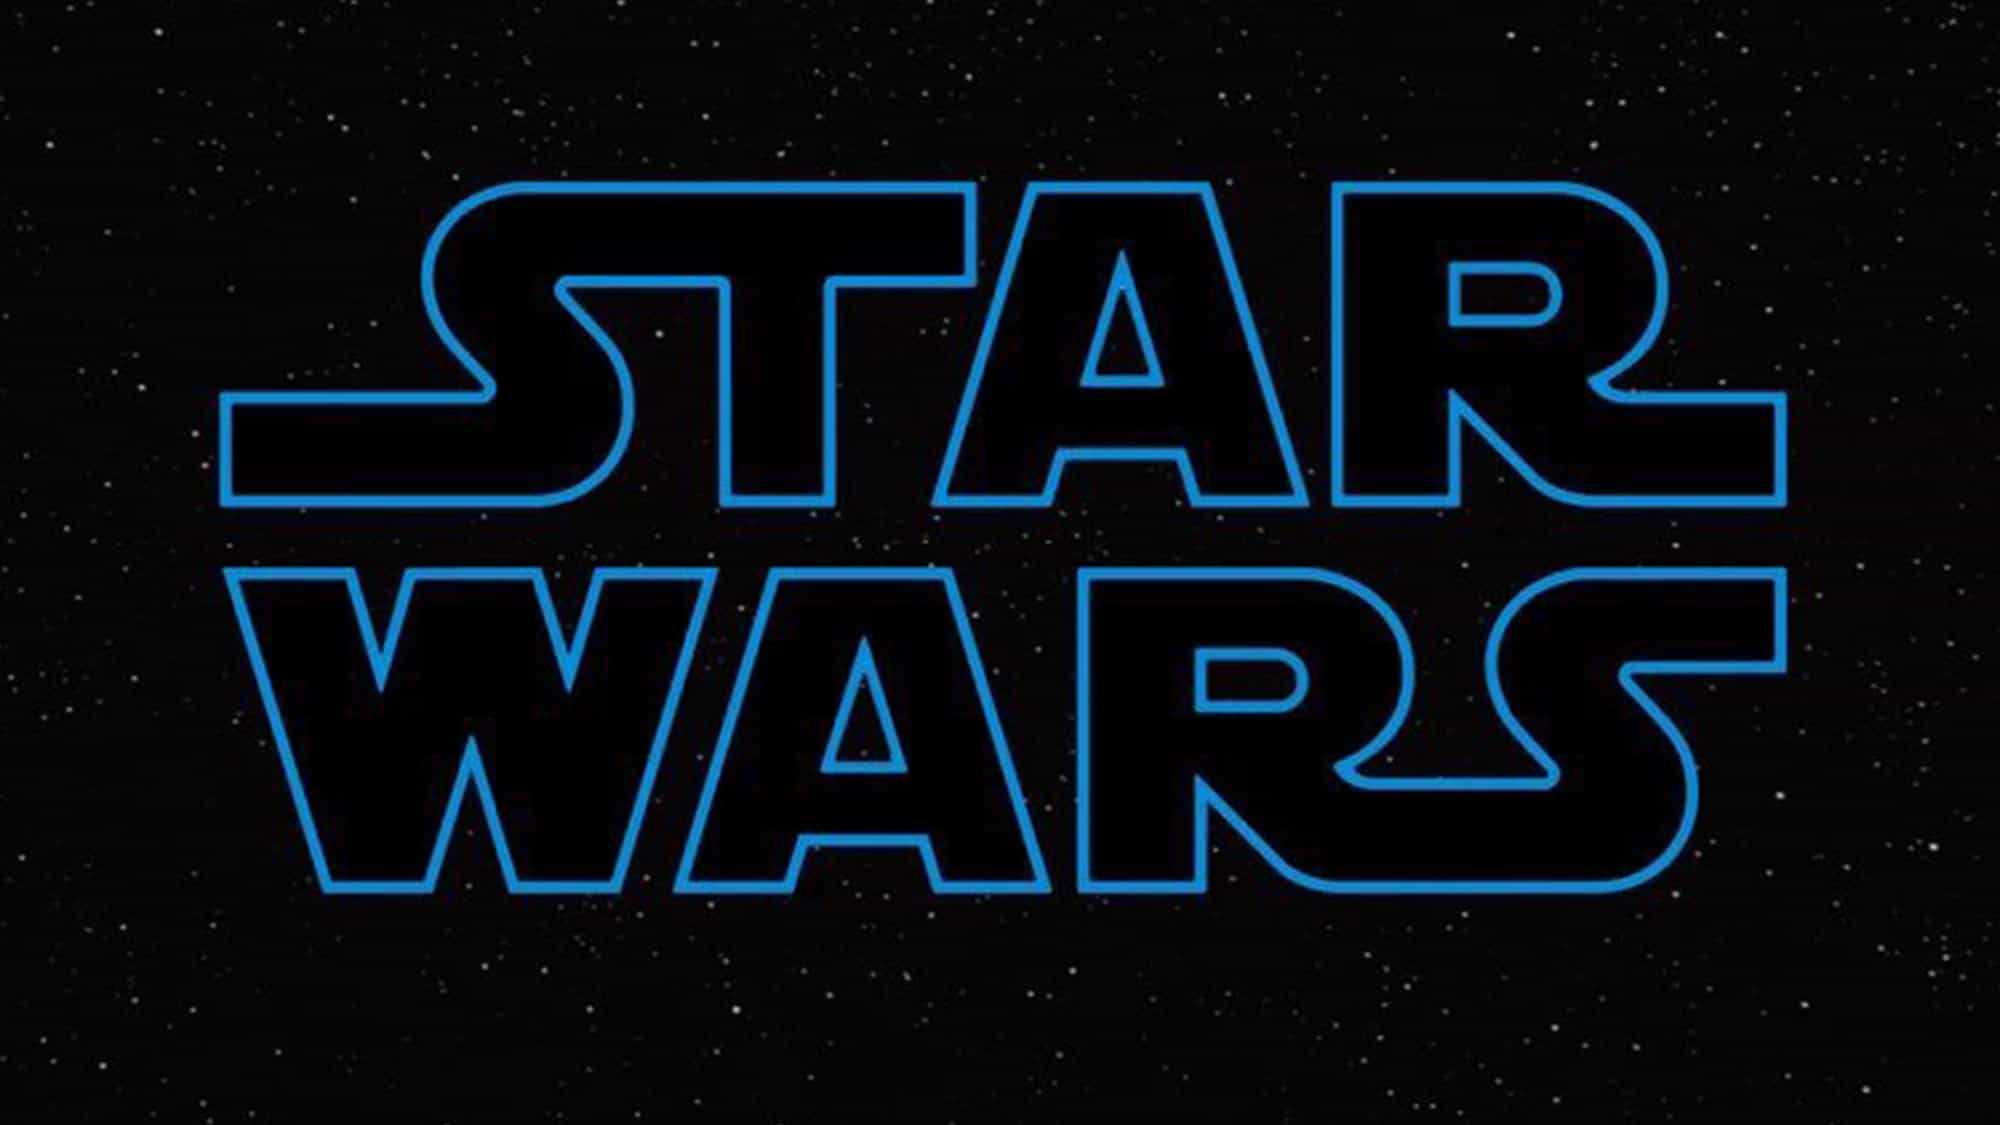 Colin Trevorrow leaves as director of Star Wars Episode IX